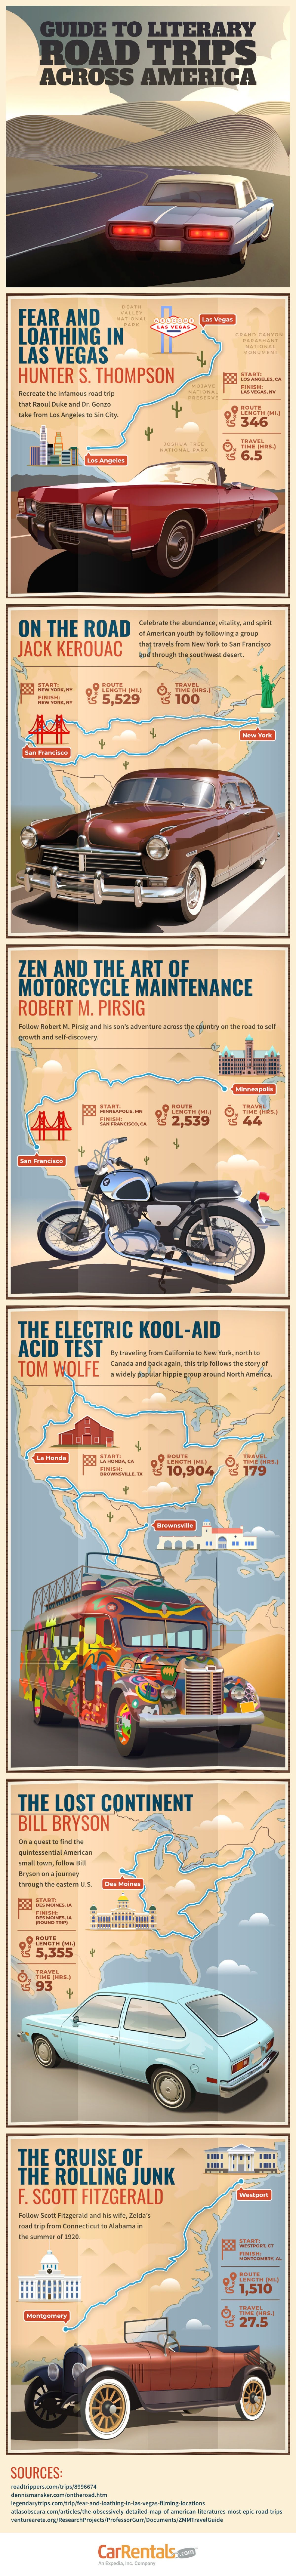 your-guide-to-literary-road-trips-across-america-infographic